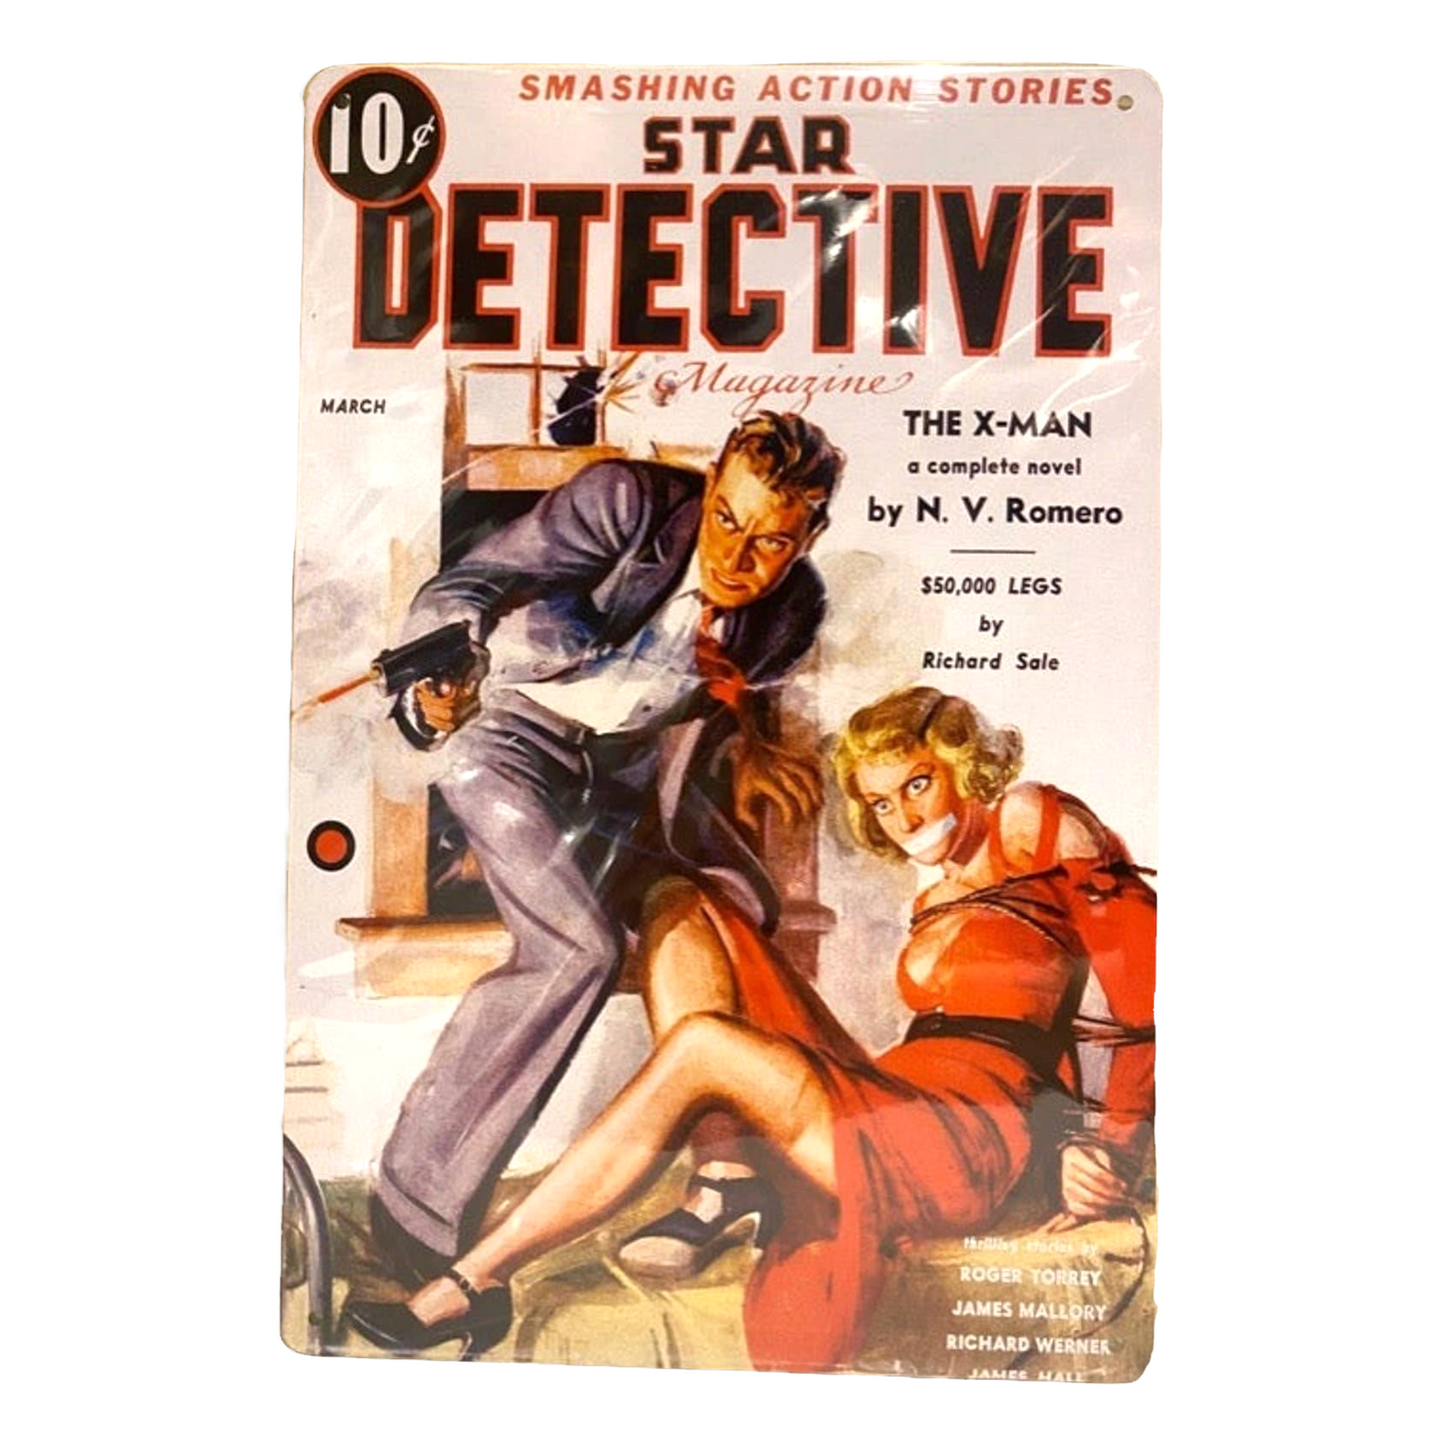 Star Detective March Comic Cover Metal Tin Sign 8"x12"